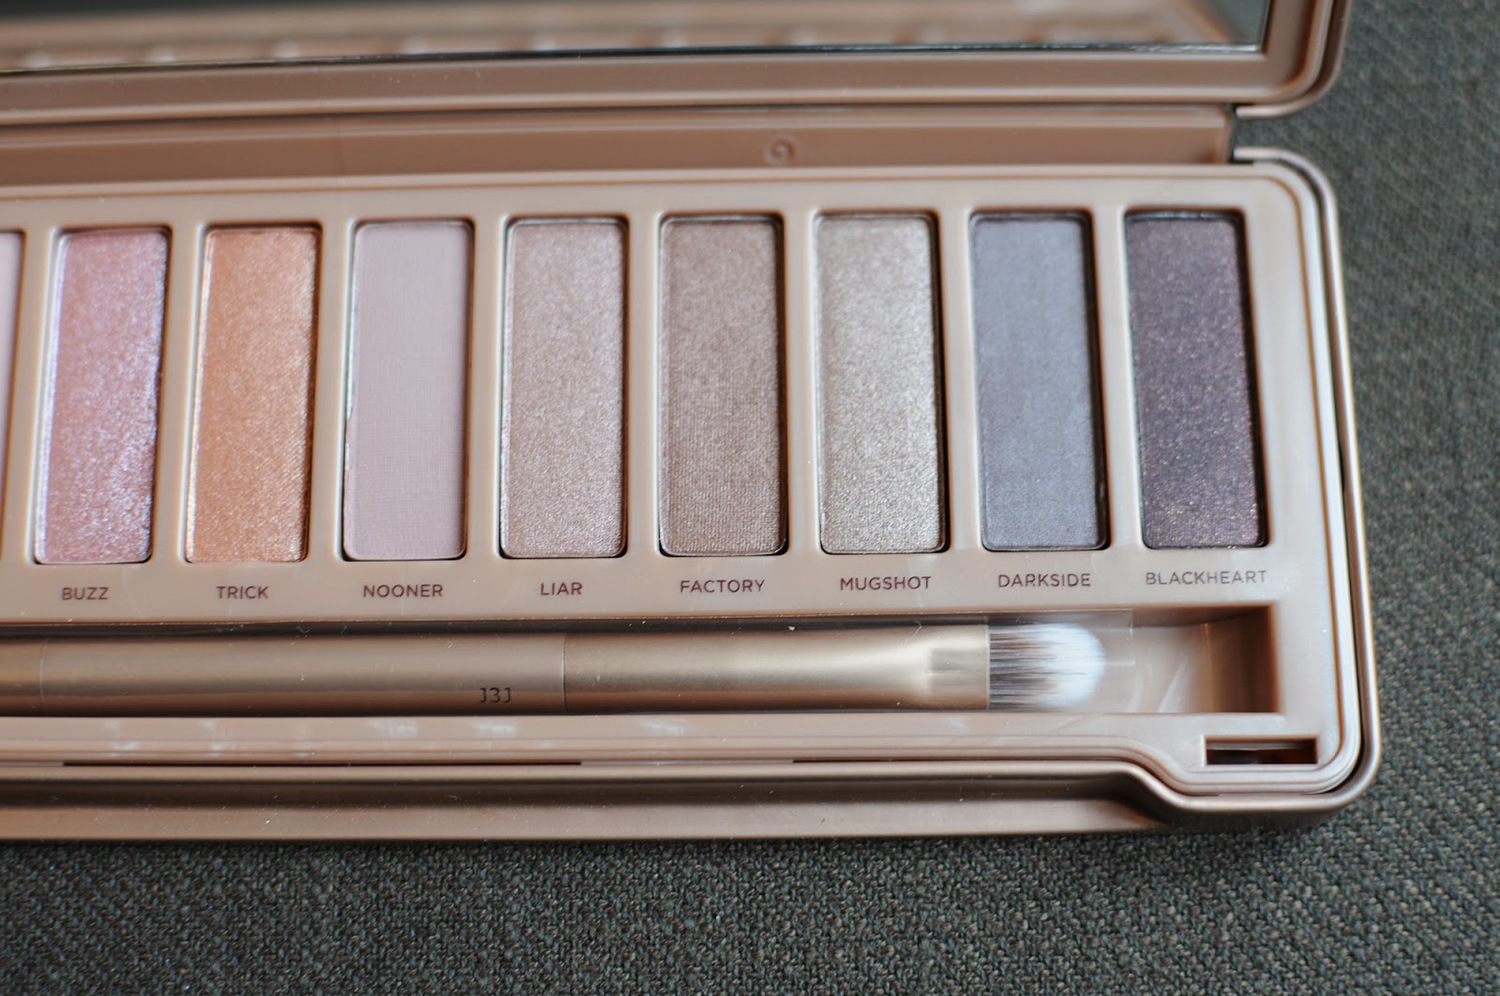 Urban Decay NAKED eye shadow palette (pictured above): $54.00. &nbs...